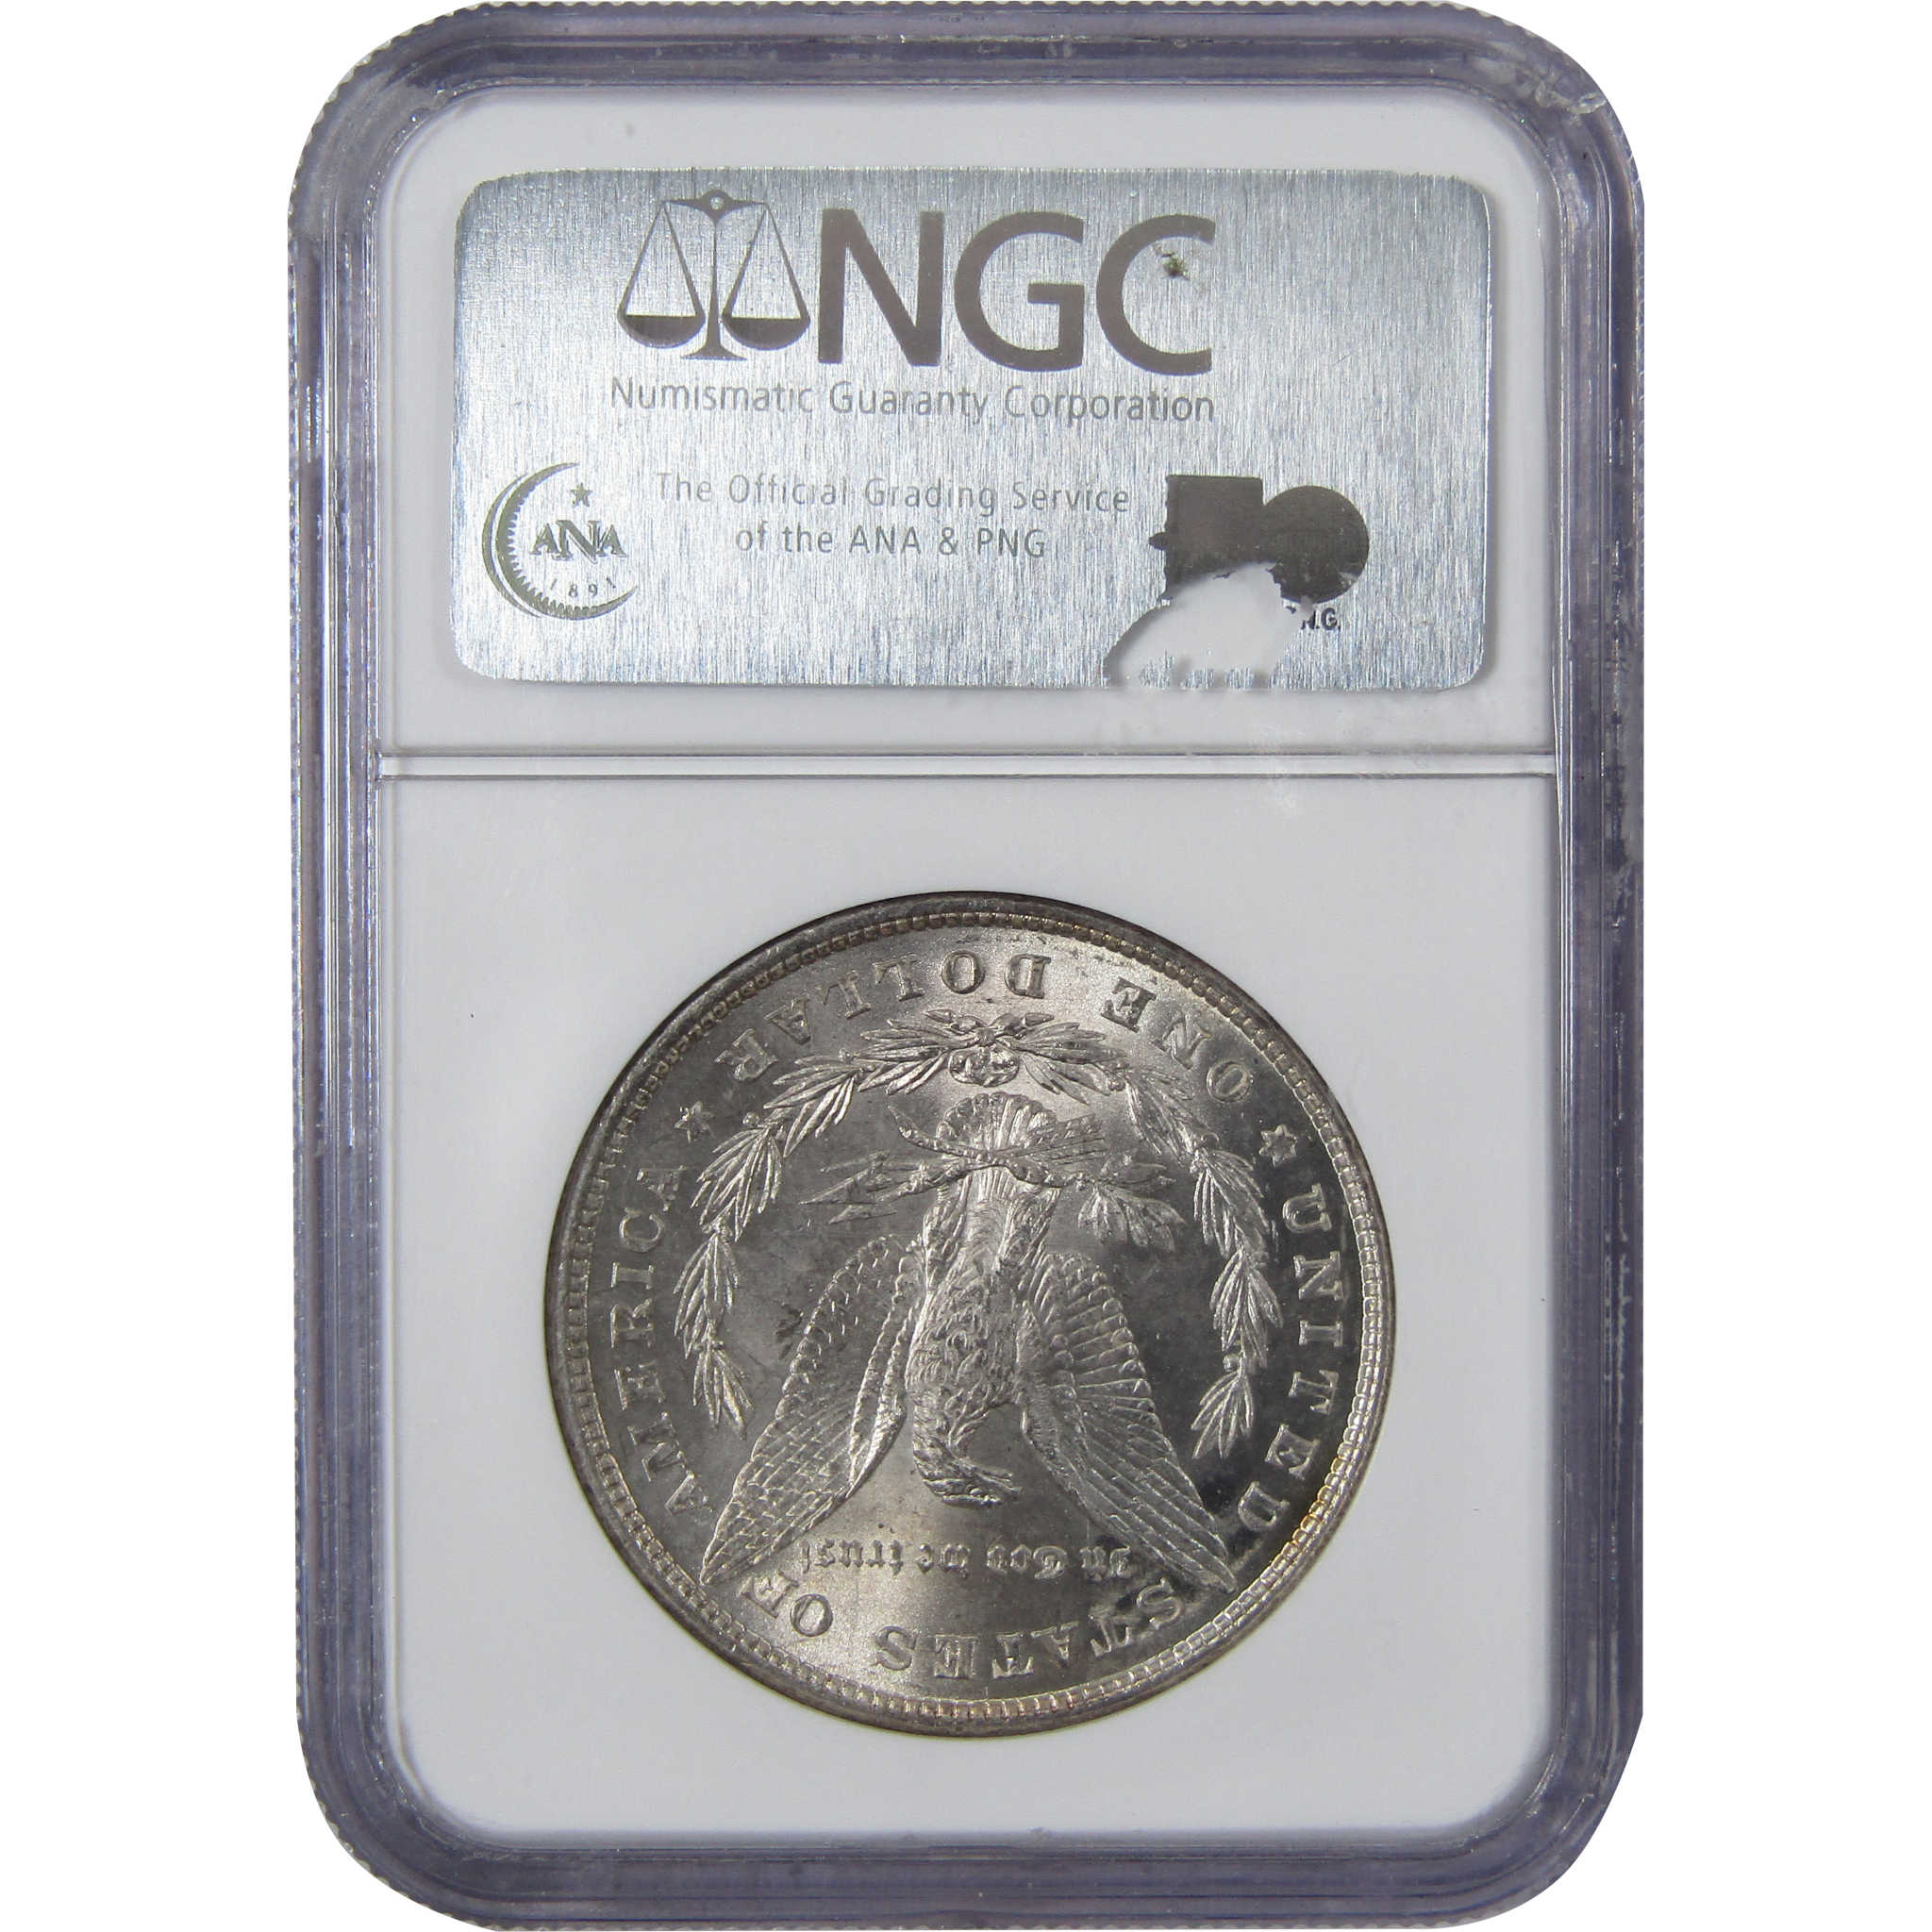 1878 8TF Morgan Dollar MS 63 NGC 90% Silver Uncirculated SKU:I705 - Morgan coin - Morgan silver dollar - Morgan silver dollar for sale - Profile Coins &amp; Collectibles